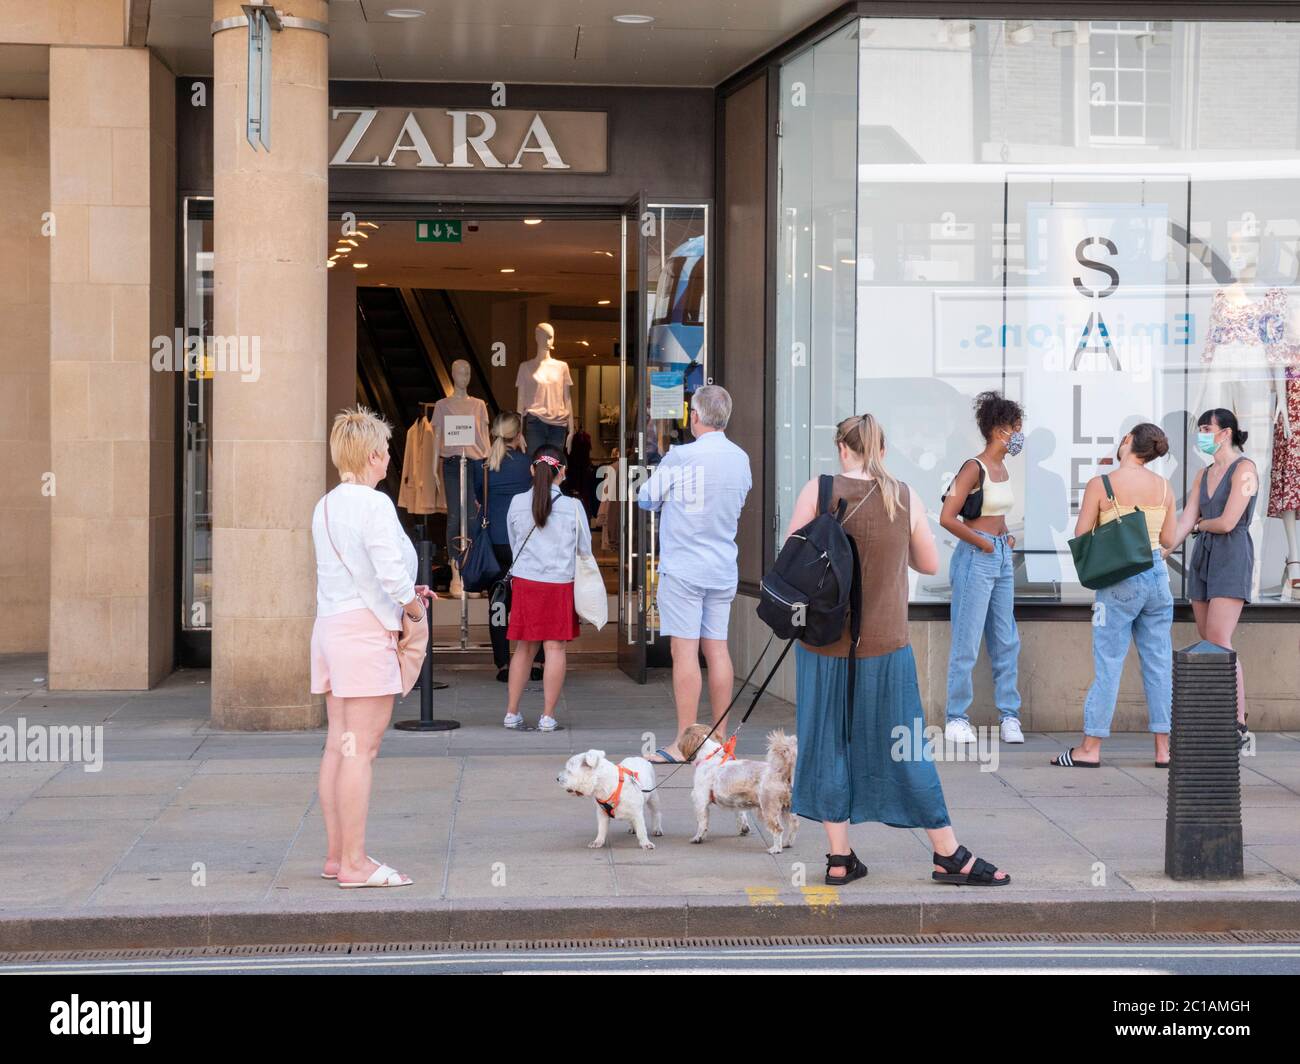 Cambridge, UK. 15th June, 2020. Customers queue outside Zara clothes shop.  Non essential retail shops open for the first time in three months after  the coronavirus lockdown. Credit: Julian Eales/Alamy Live News